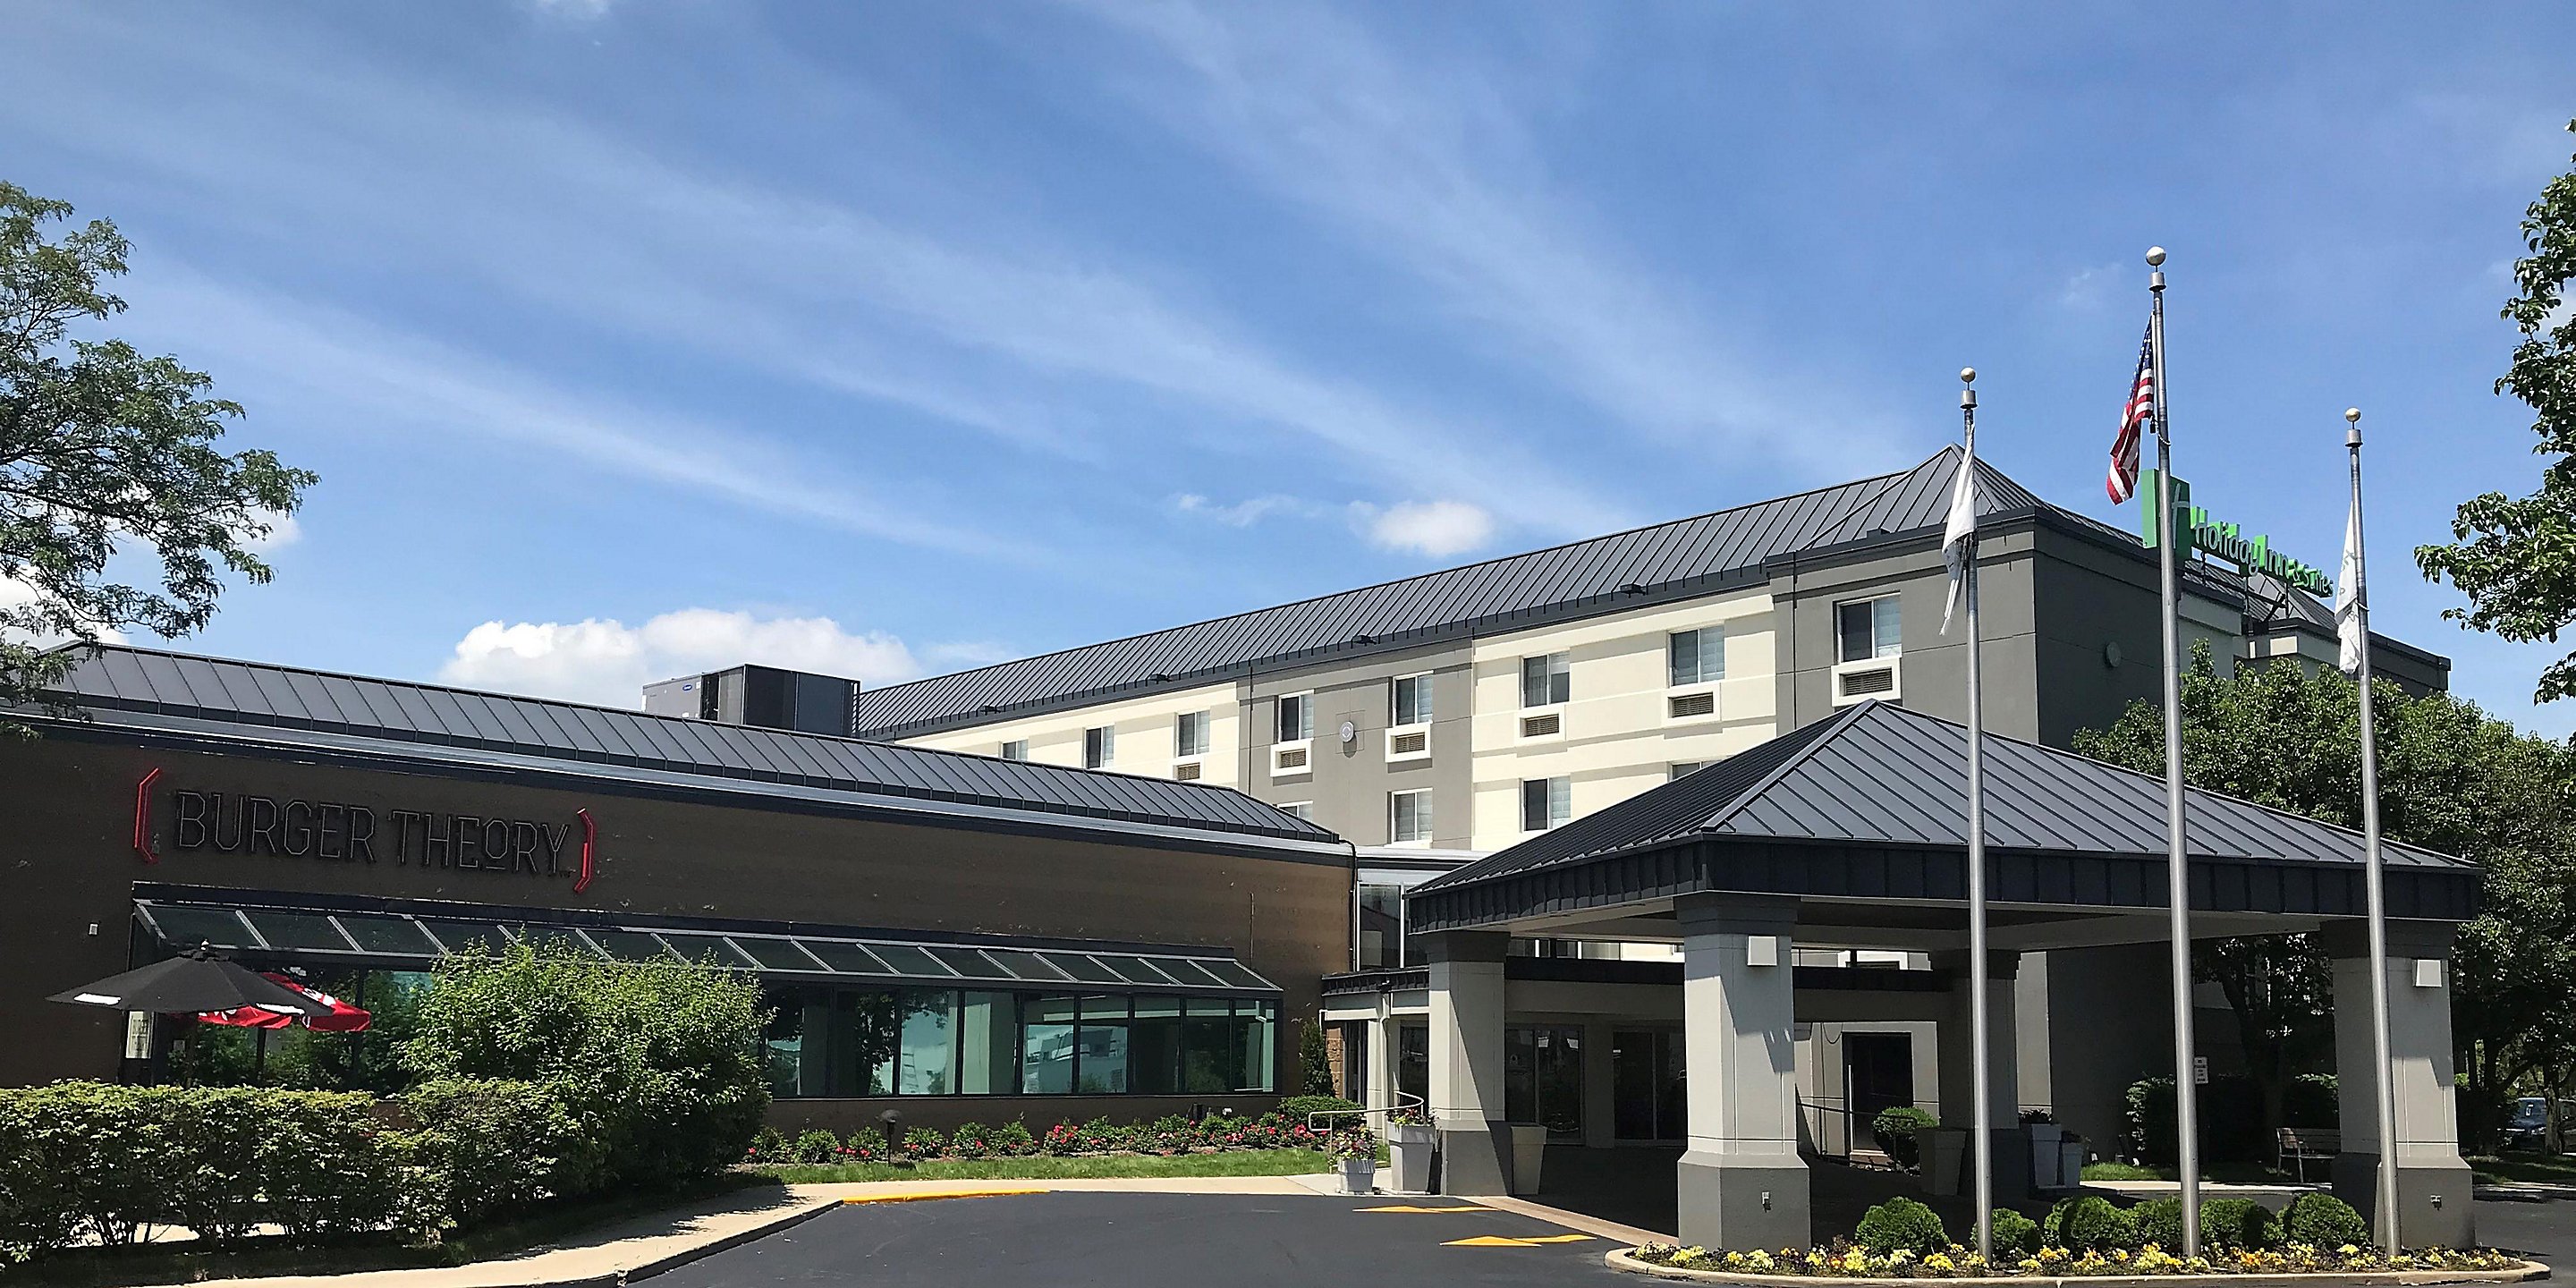 The Fresh, New Look of the Holiday Inn &amp; Suites - Carol Stream